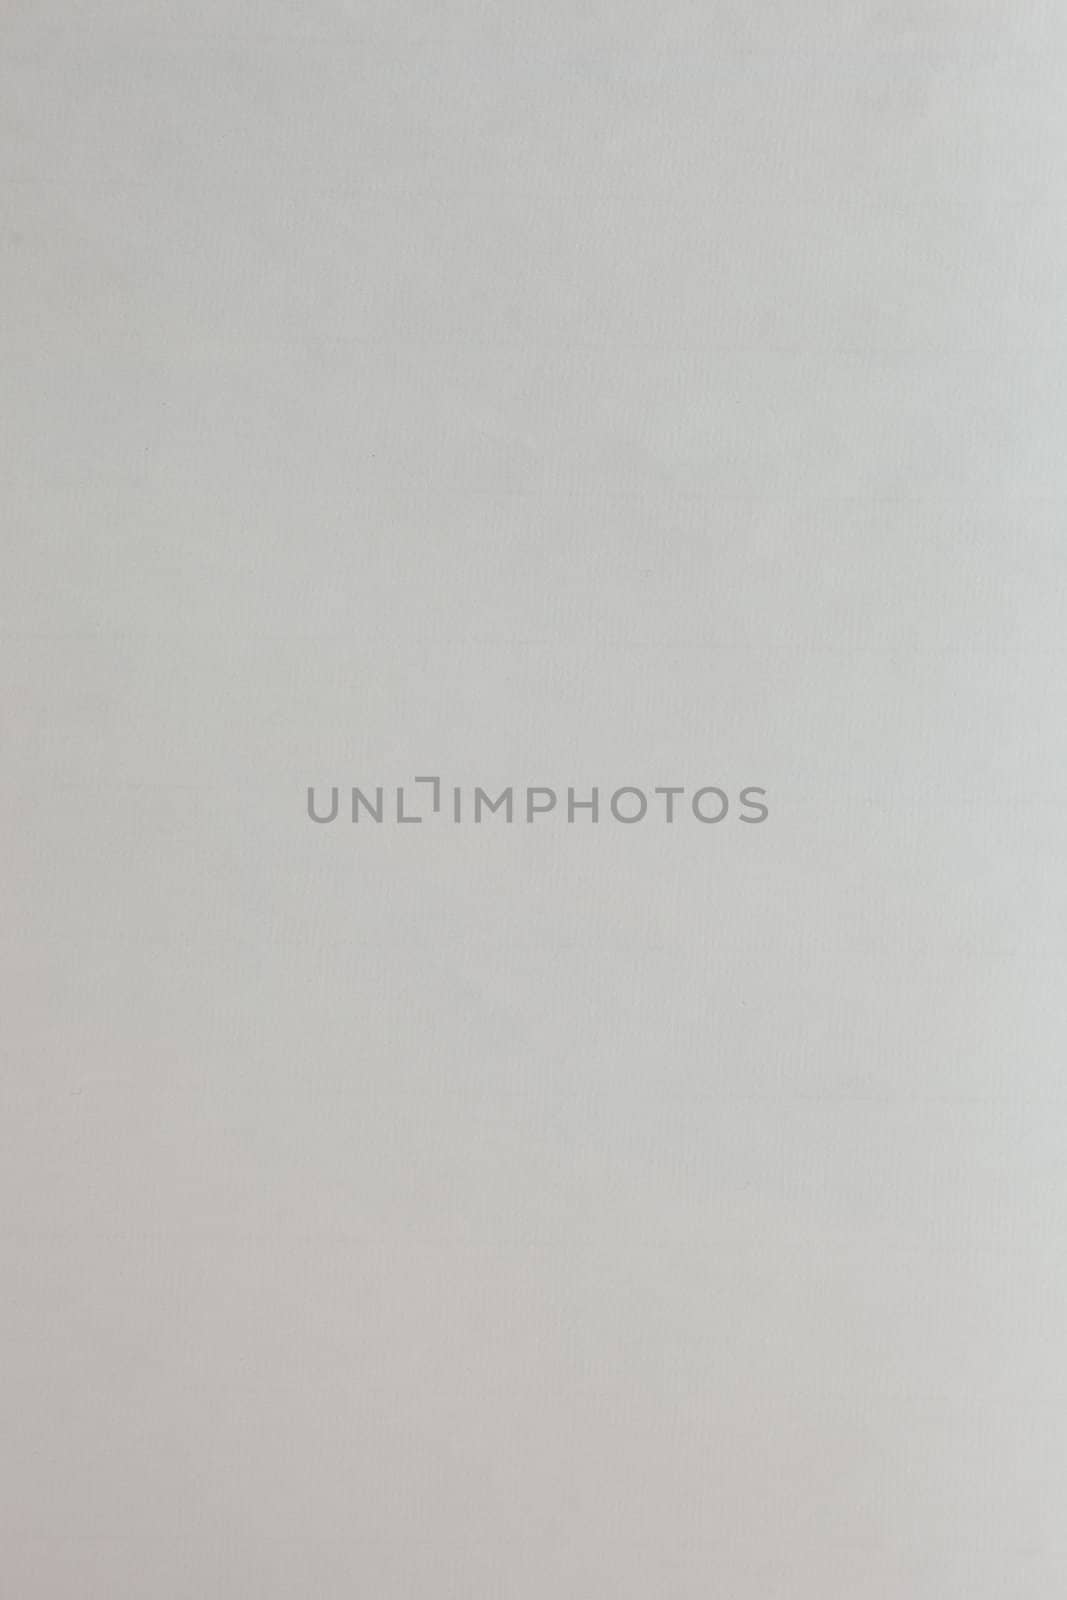 Fine blank pastel paper texture for background